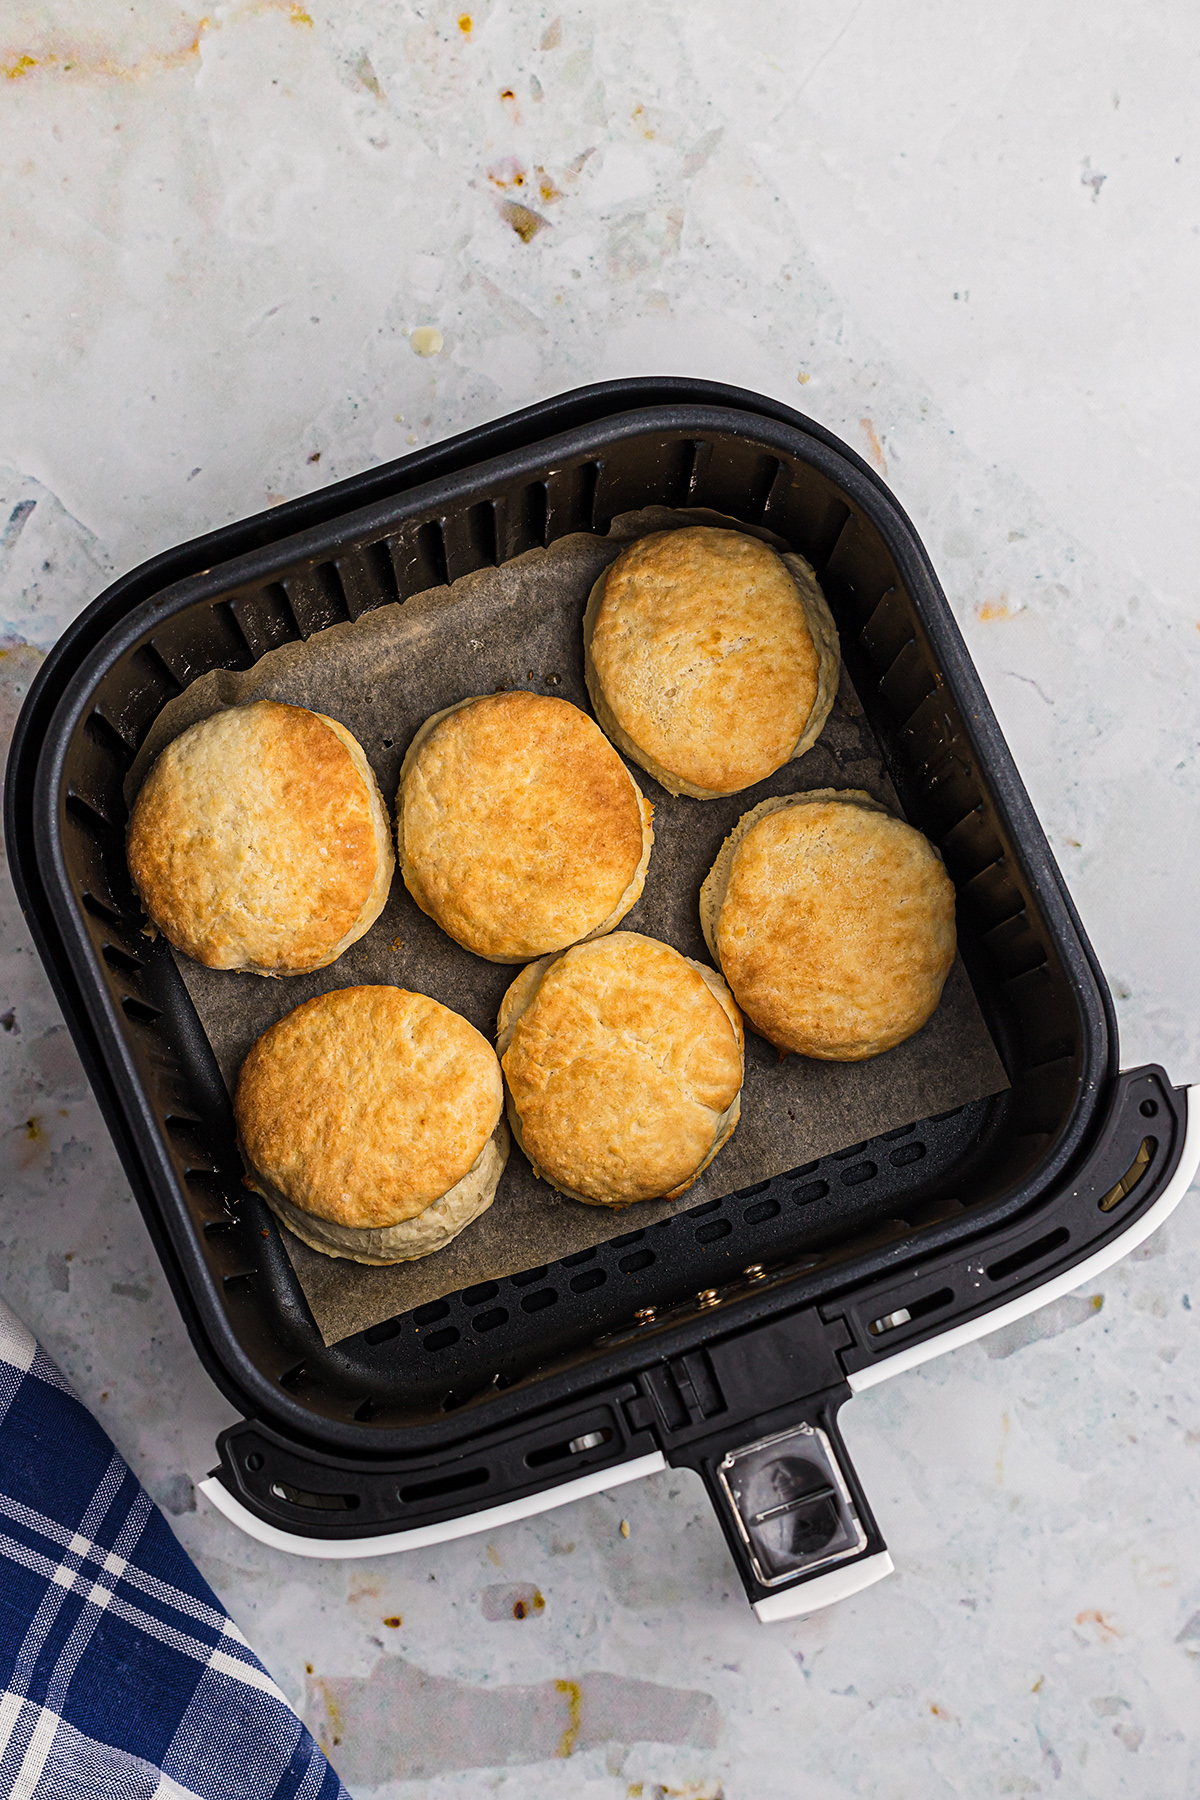 Overhead view of biscuits in an air fryer basket.